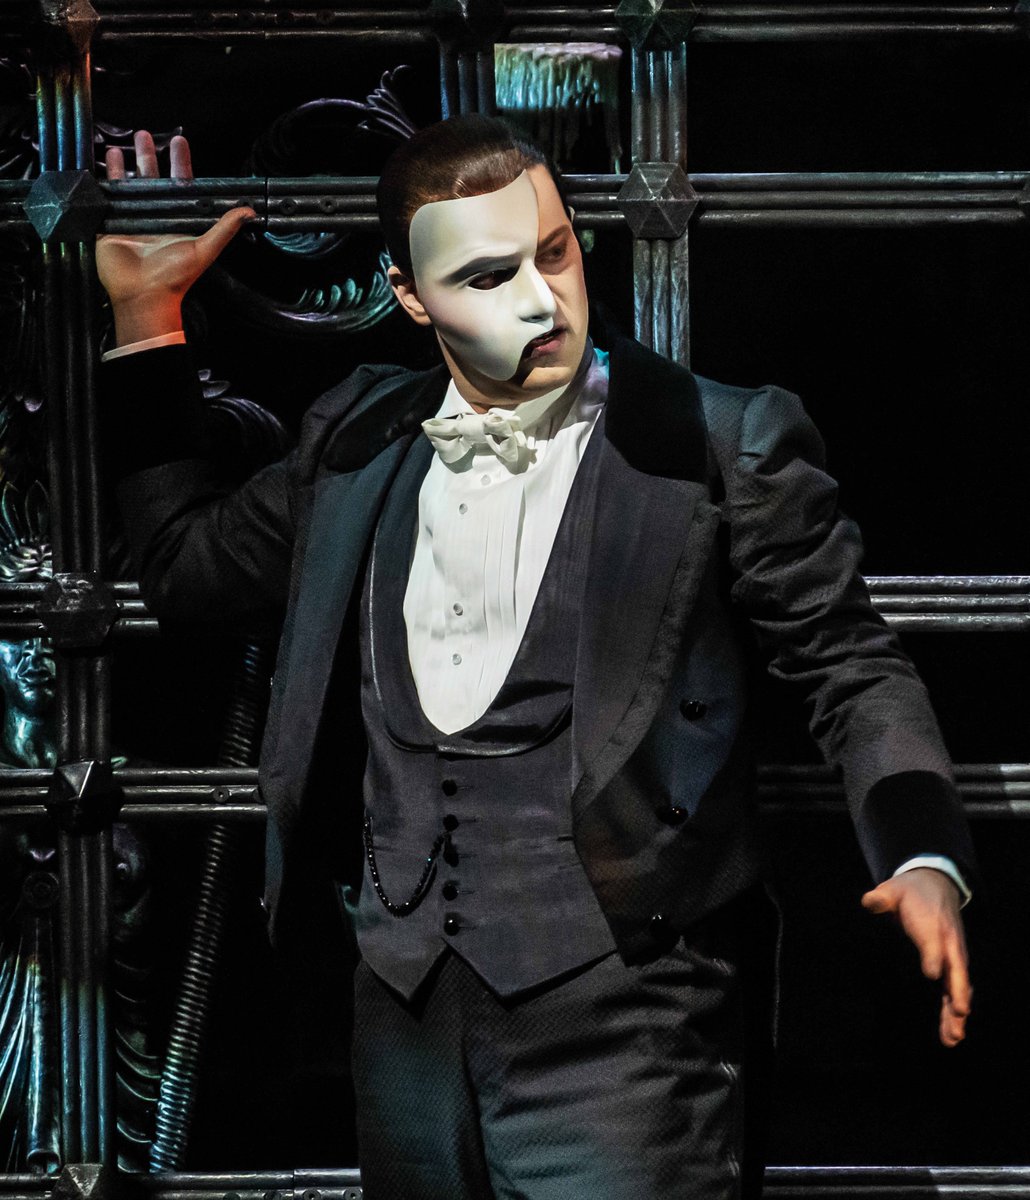 NEW production images from @PhantomOpera of @JRobyns as The Phantom!

📷Photos: #JohanPersson